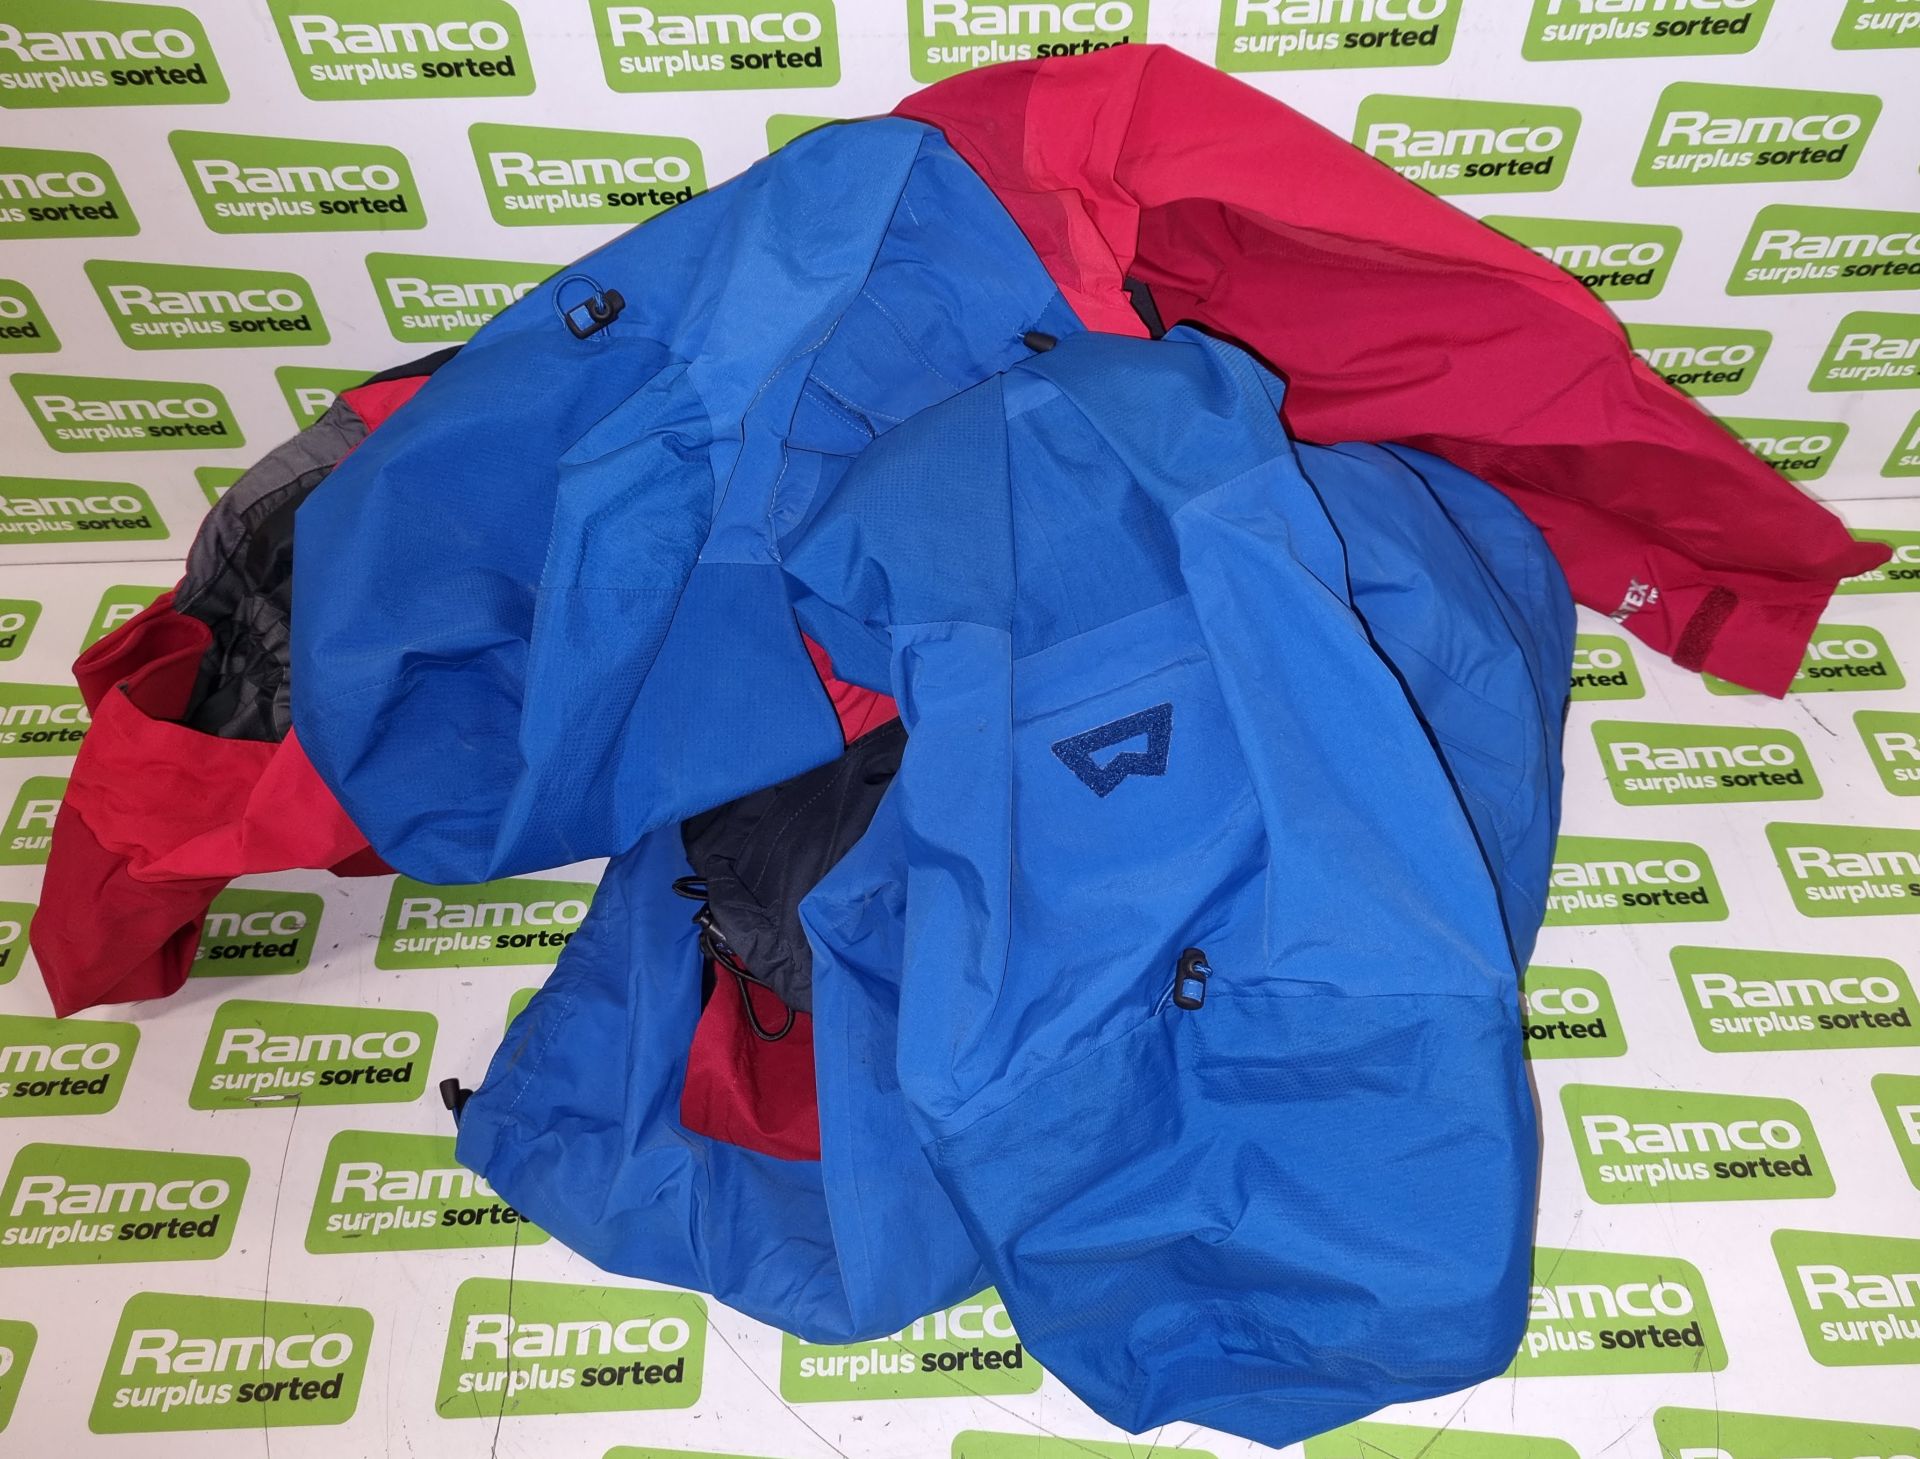 15x Hiking jackets with Gore-tex - Mountain & Rab - mixed grades and sizes - Image 3 of 5